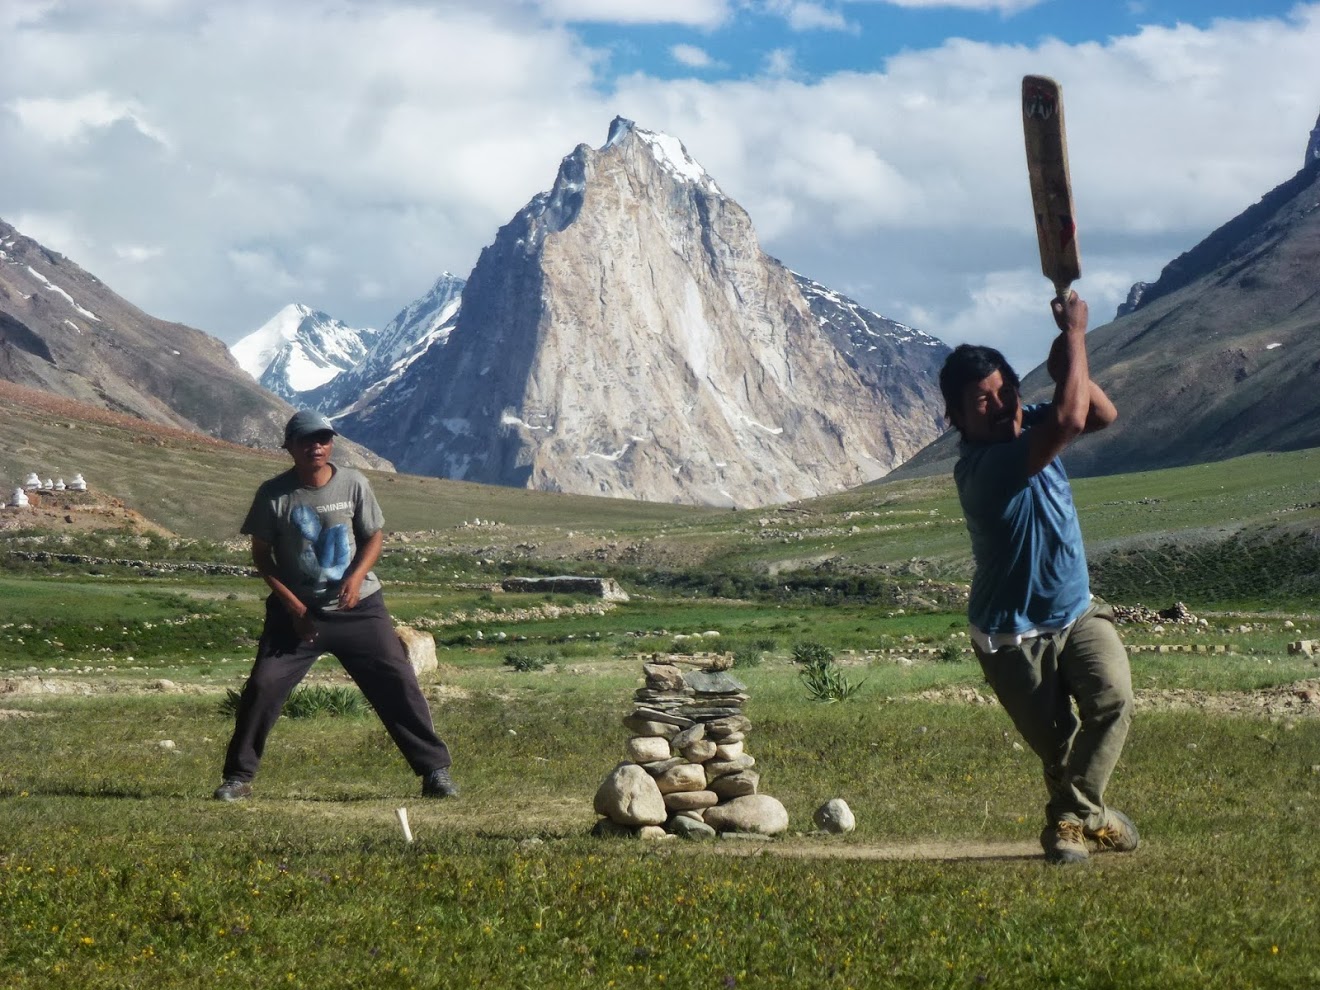 An improvised Sunday afternoon cricket match in what must be the most scenic cricket pitch in the world. A rest day in Kargiakh on a long trek from Lamayuru to Darsha through the Zanskar valley in Ladakh, India.